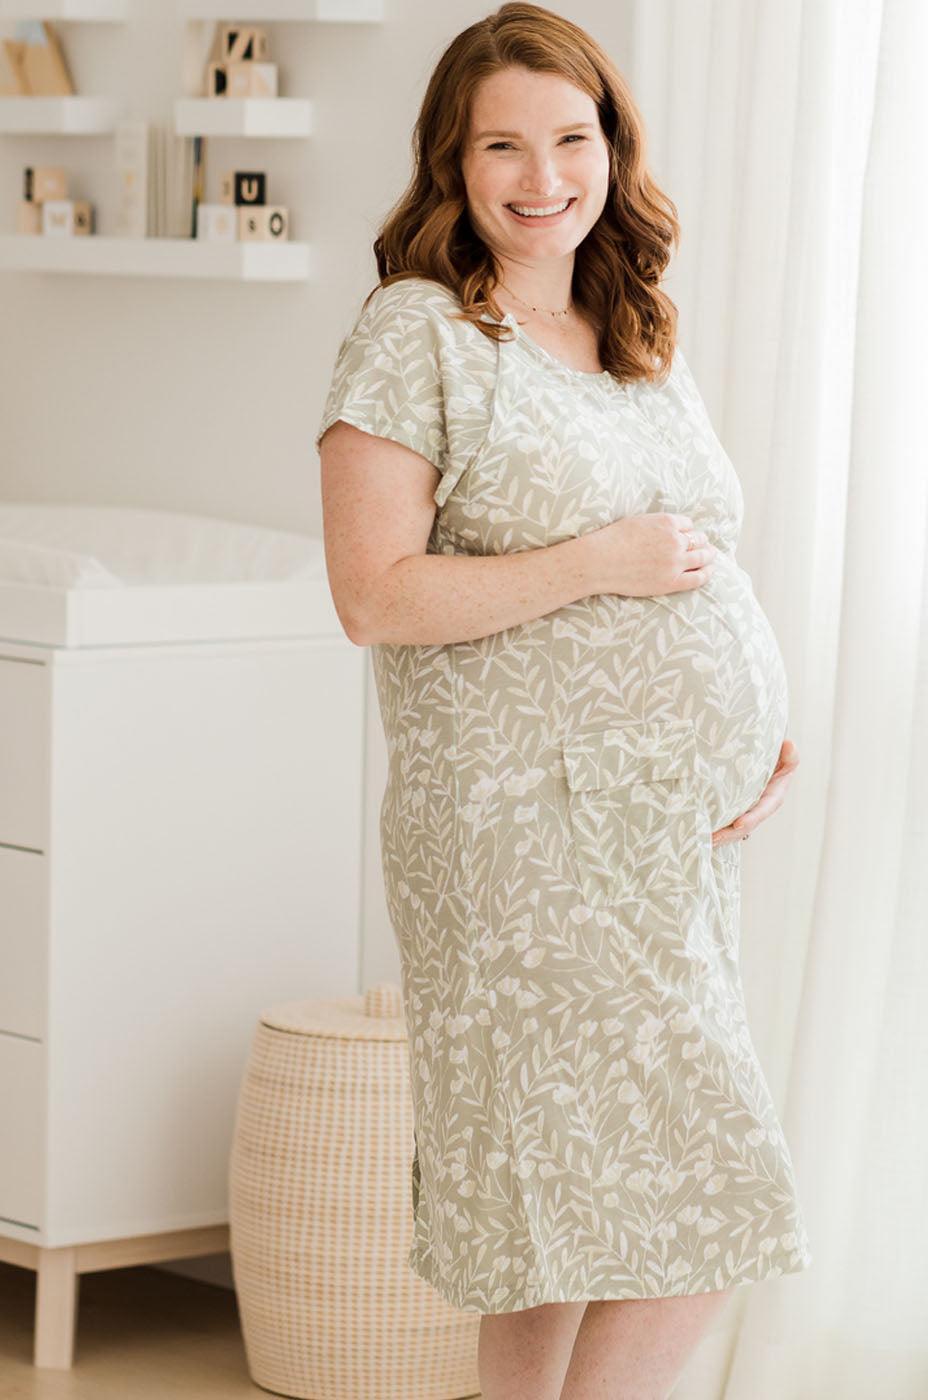 Universal Labor & Delivery Gown | Black - Kindred Bravely